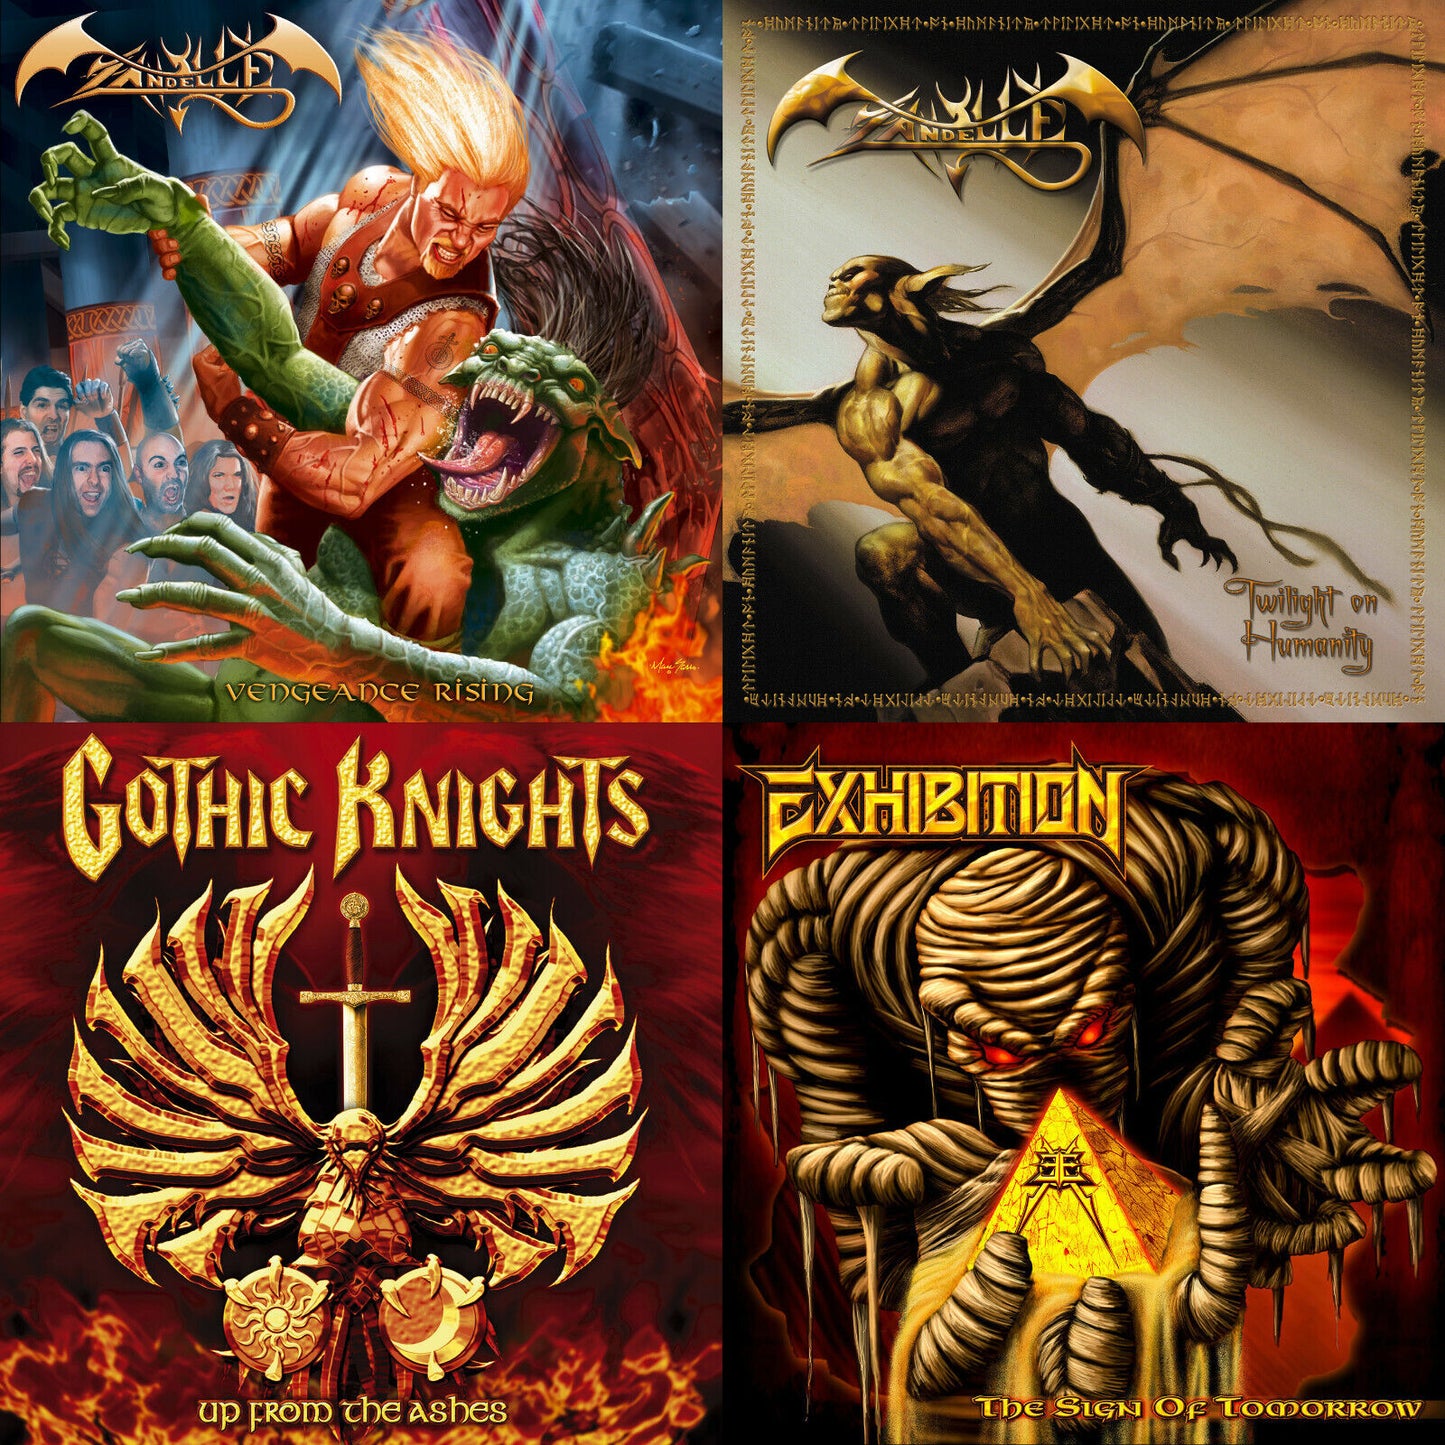 ZANDELLE + GOTHIC KNIGHTS + EXHIBITION 4CD Bundle Special Offer US Power Metal